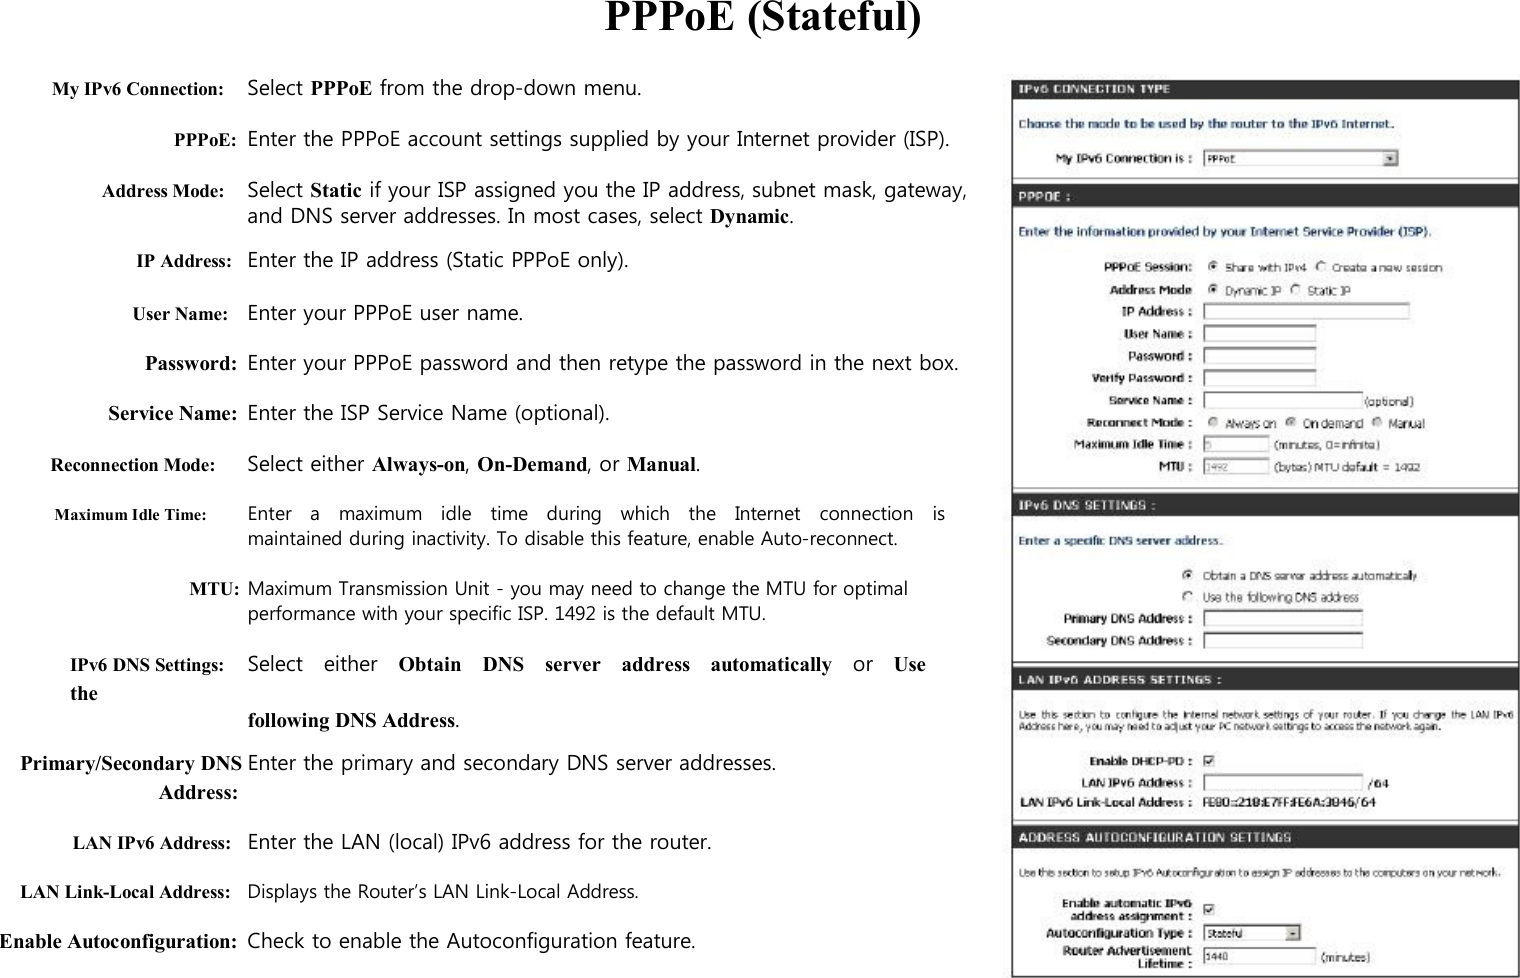  PPPoE (Stateful)  My IPv6 Connection: Select PPPoE from the drop-down menu.  PPPoE: Enter the PPPoE account settings supplied by your Internet provider (ISP).    Address Mode: Select Static if your ISP assigned you the IP address, subnet mask, gateway, and DNS server addresses. In most cases, select Dynamic. IP Address: Enter the IP address (Static PPPoE only).  User Name: Enter your PPPoE user name.  Password: Enter your PPPoE password and then retype the password in the next box.  Service Name: Enter the ISP Service Name (optional).  Reconnection Mode: Select either Always-on, On-Demand, or Manual.  Maximum Idle Time: Enter   a    maximum    idle    time   during   which    the   Internet    connection    is maintained during inactivity. To disable this feature, enable Auto-reconnect.  MTU: Maximum Transmission Unit - you may need to change the MTU for optimal performance with your specific ISP. 1492 is the default MTU.  IPv6 DNS Settings: Select    either    Obtain    DNS    server    address    automatically    or    Use   the following DNS Address. Primary/Secondary DNS Enter the primary and secondary DNS server addresses. Address:  LAN IPv6 Address: Enter the LAN (local) IPv6 address for the router.  LAN Link-Local Address: Displays the Router’s LAN Link-Local Address.  Enable Autoconfiguration: Check to enable the Autoconfiguration feature.                  